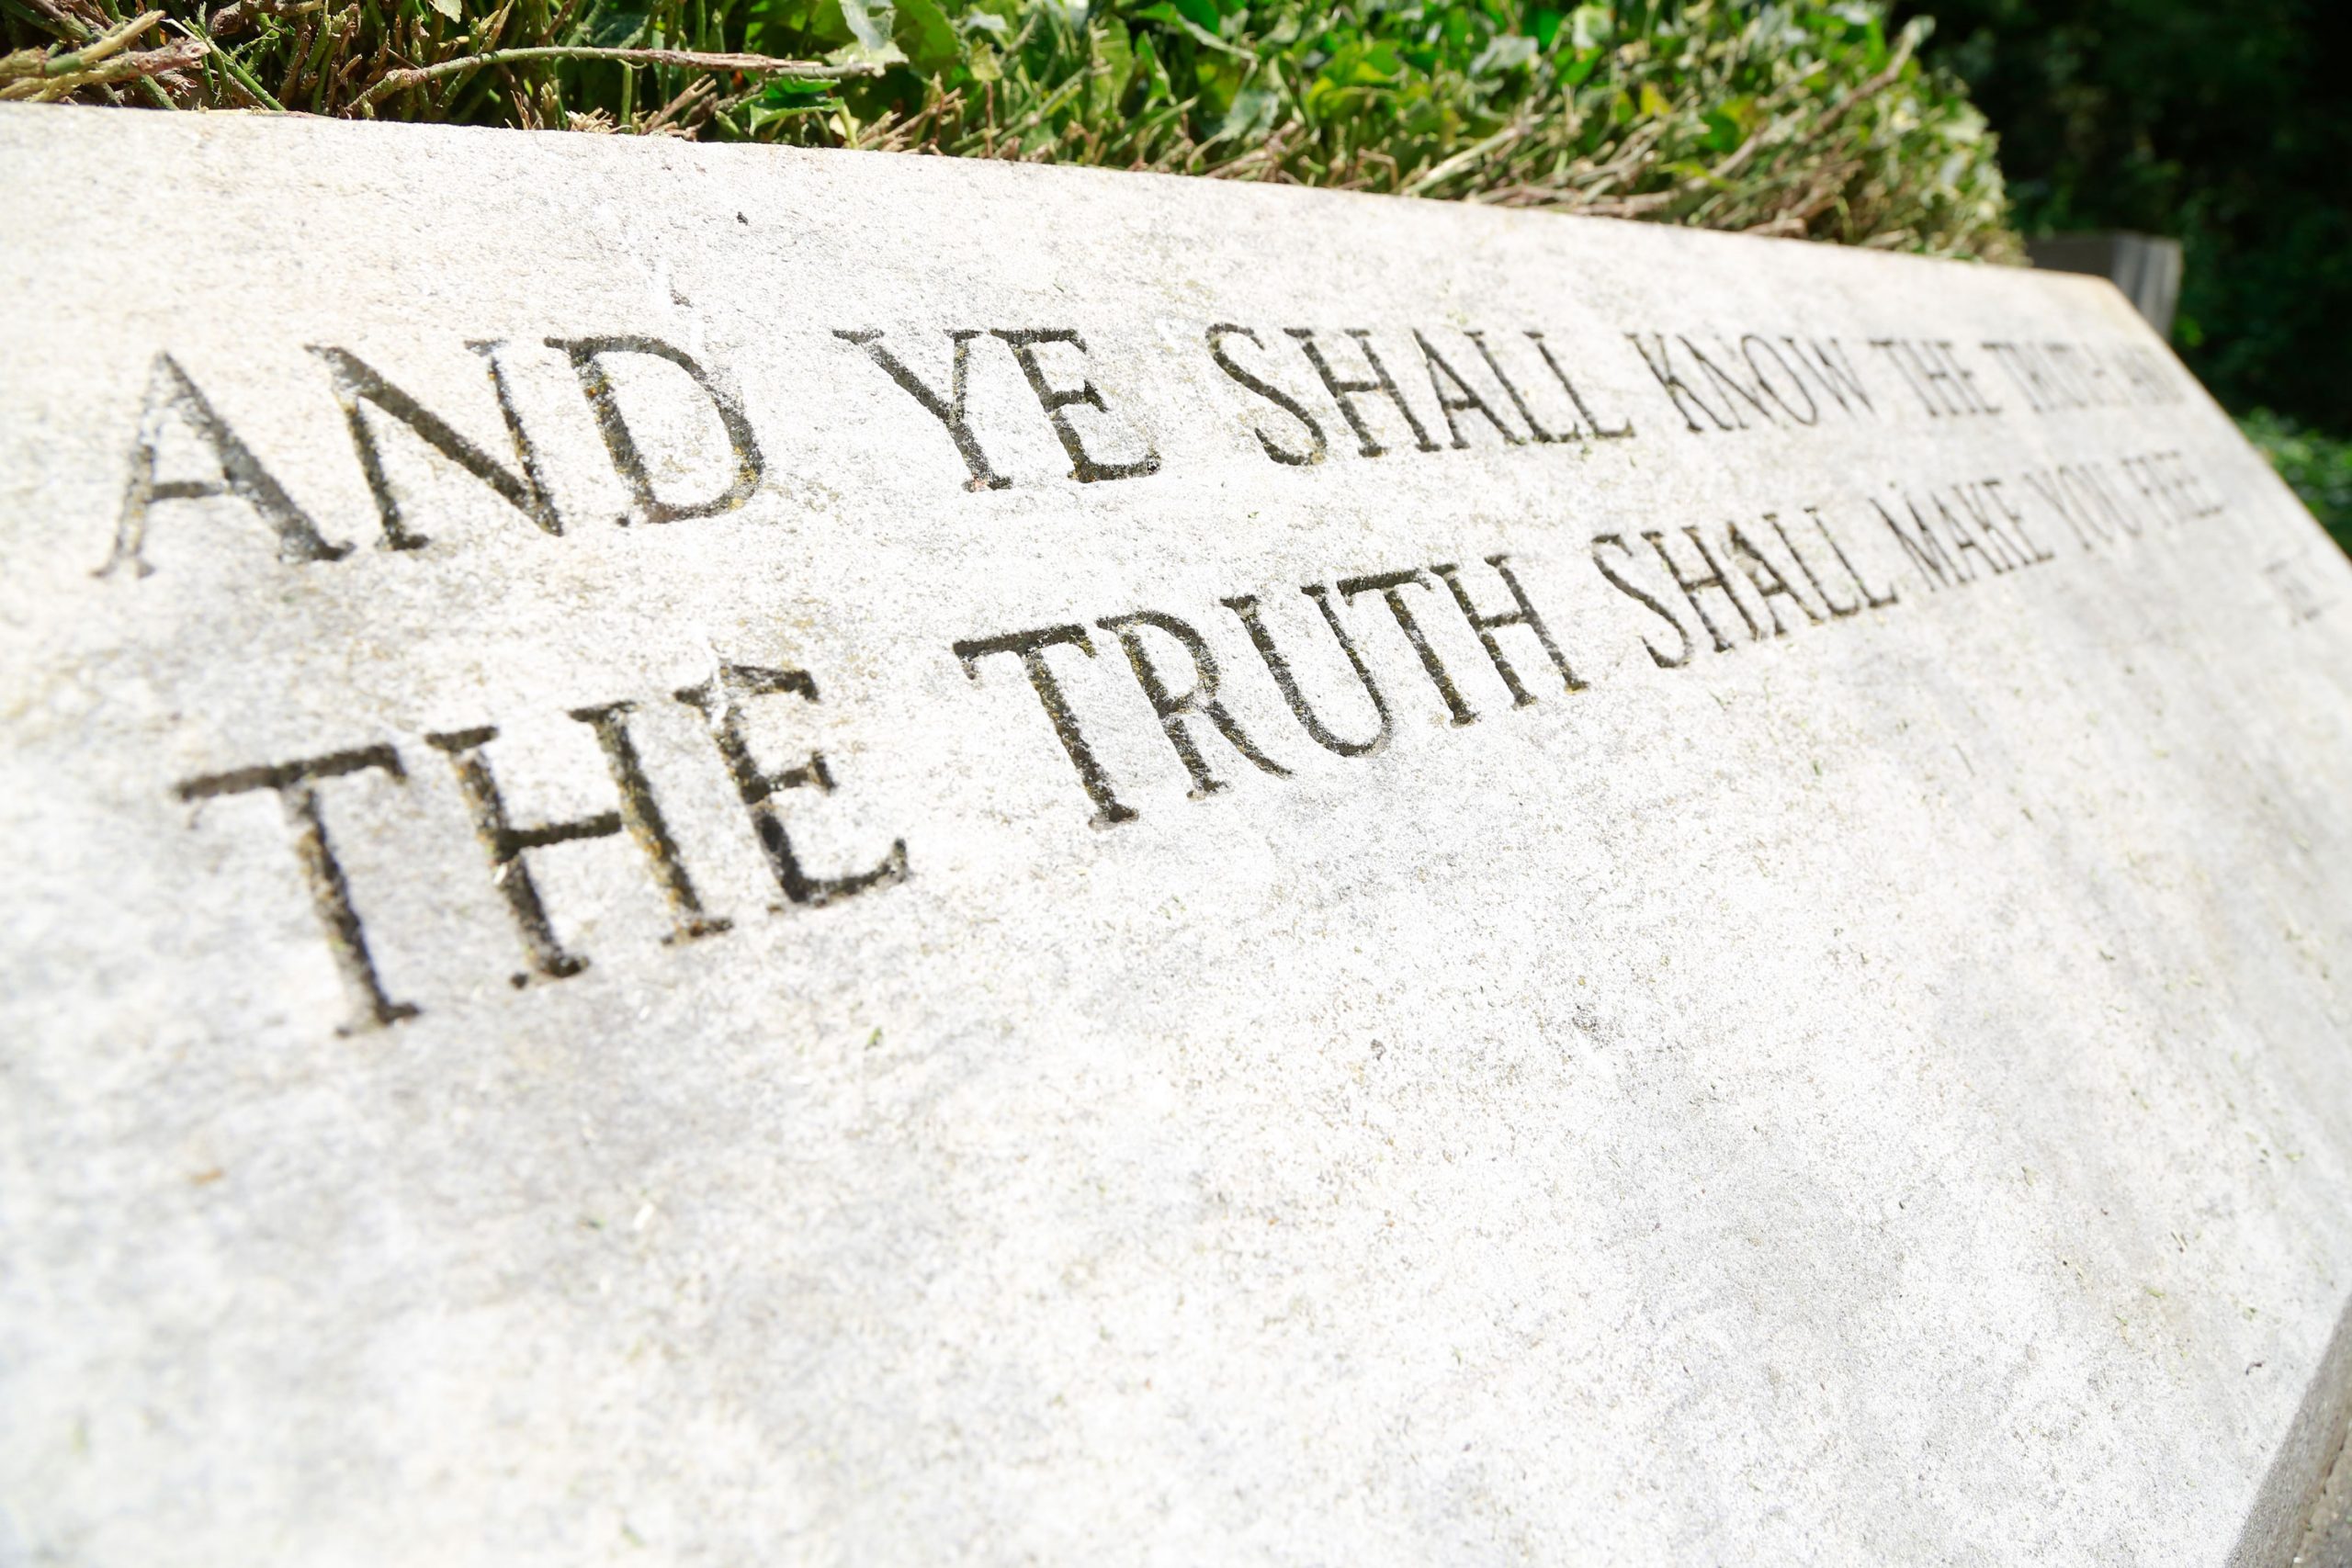 quote on stone slab and ye shall know the truth, and the truth shall make you free